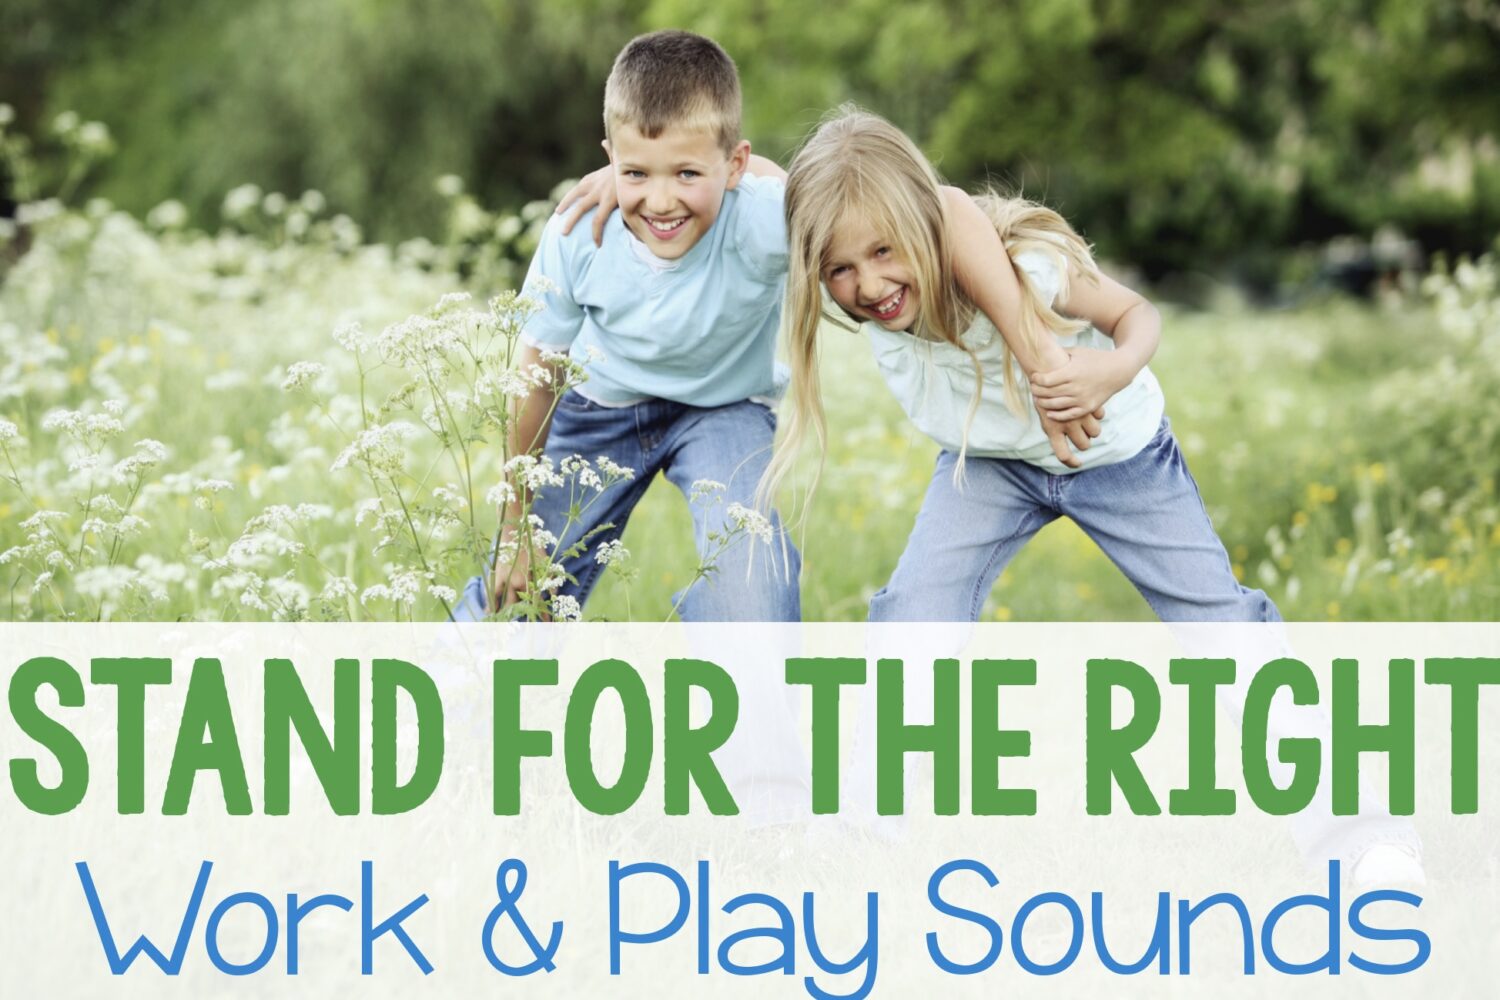 Use this Stand for the Right Work & Play Sounds nature and senses singing time idea by comparing work sounds and play sounds with additional ideas for LDS Primary Music Leaders.